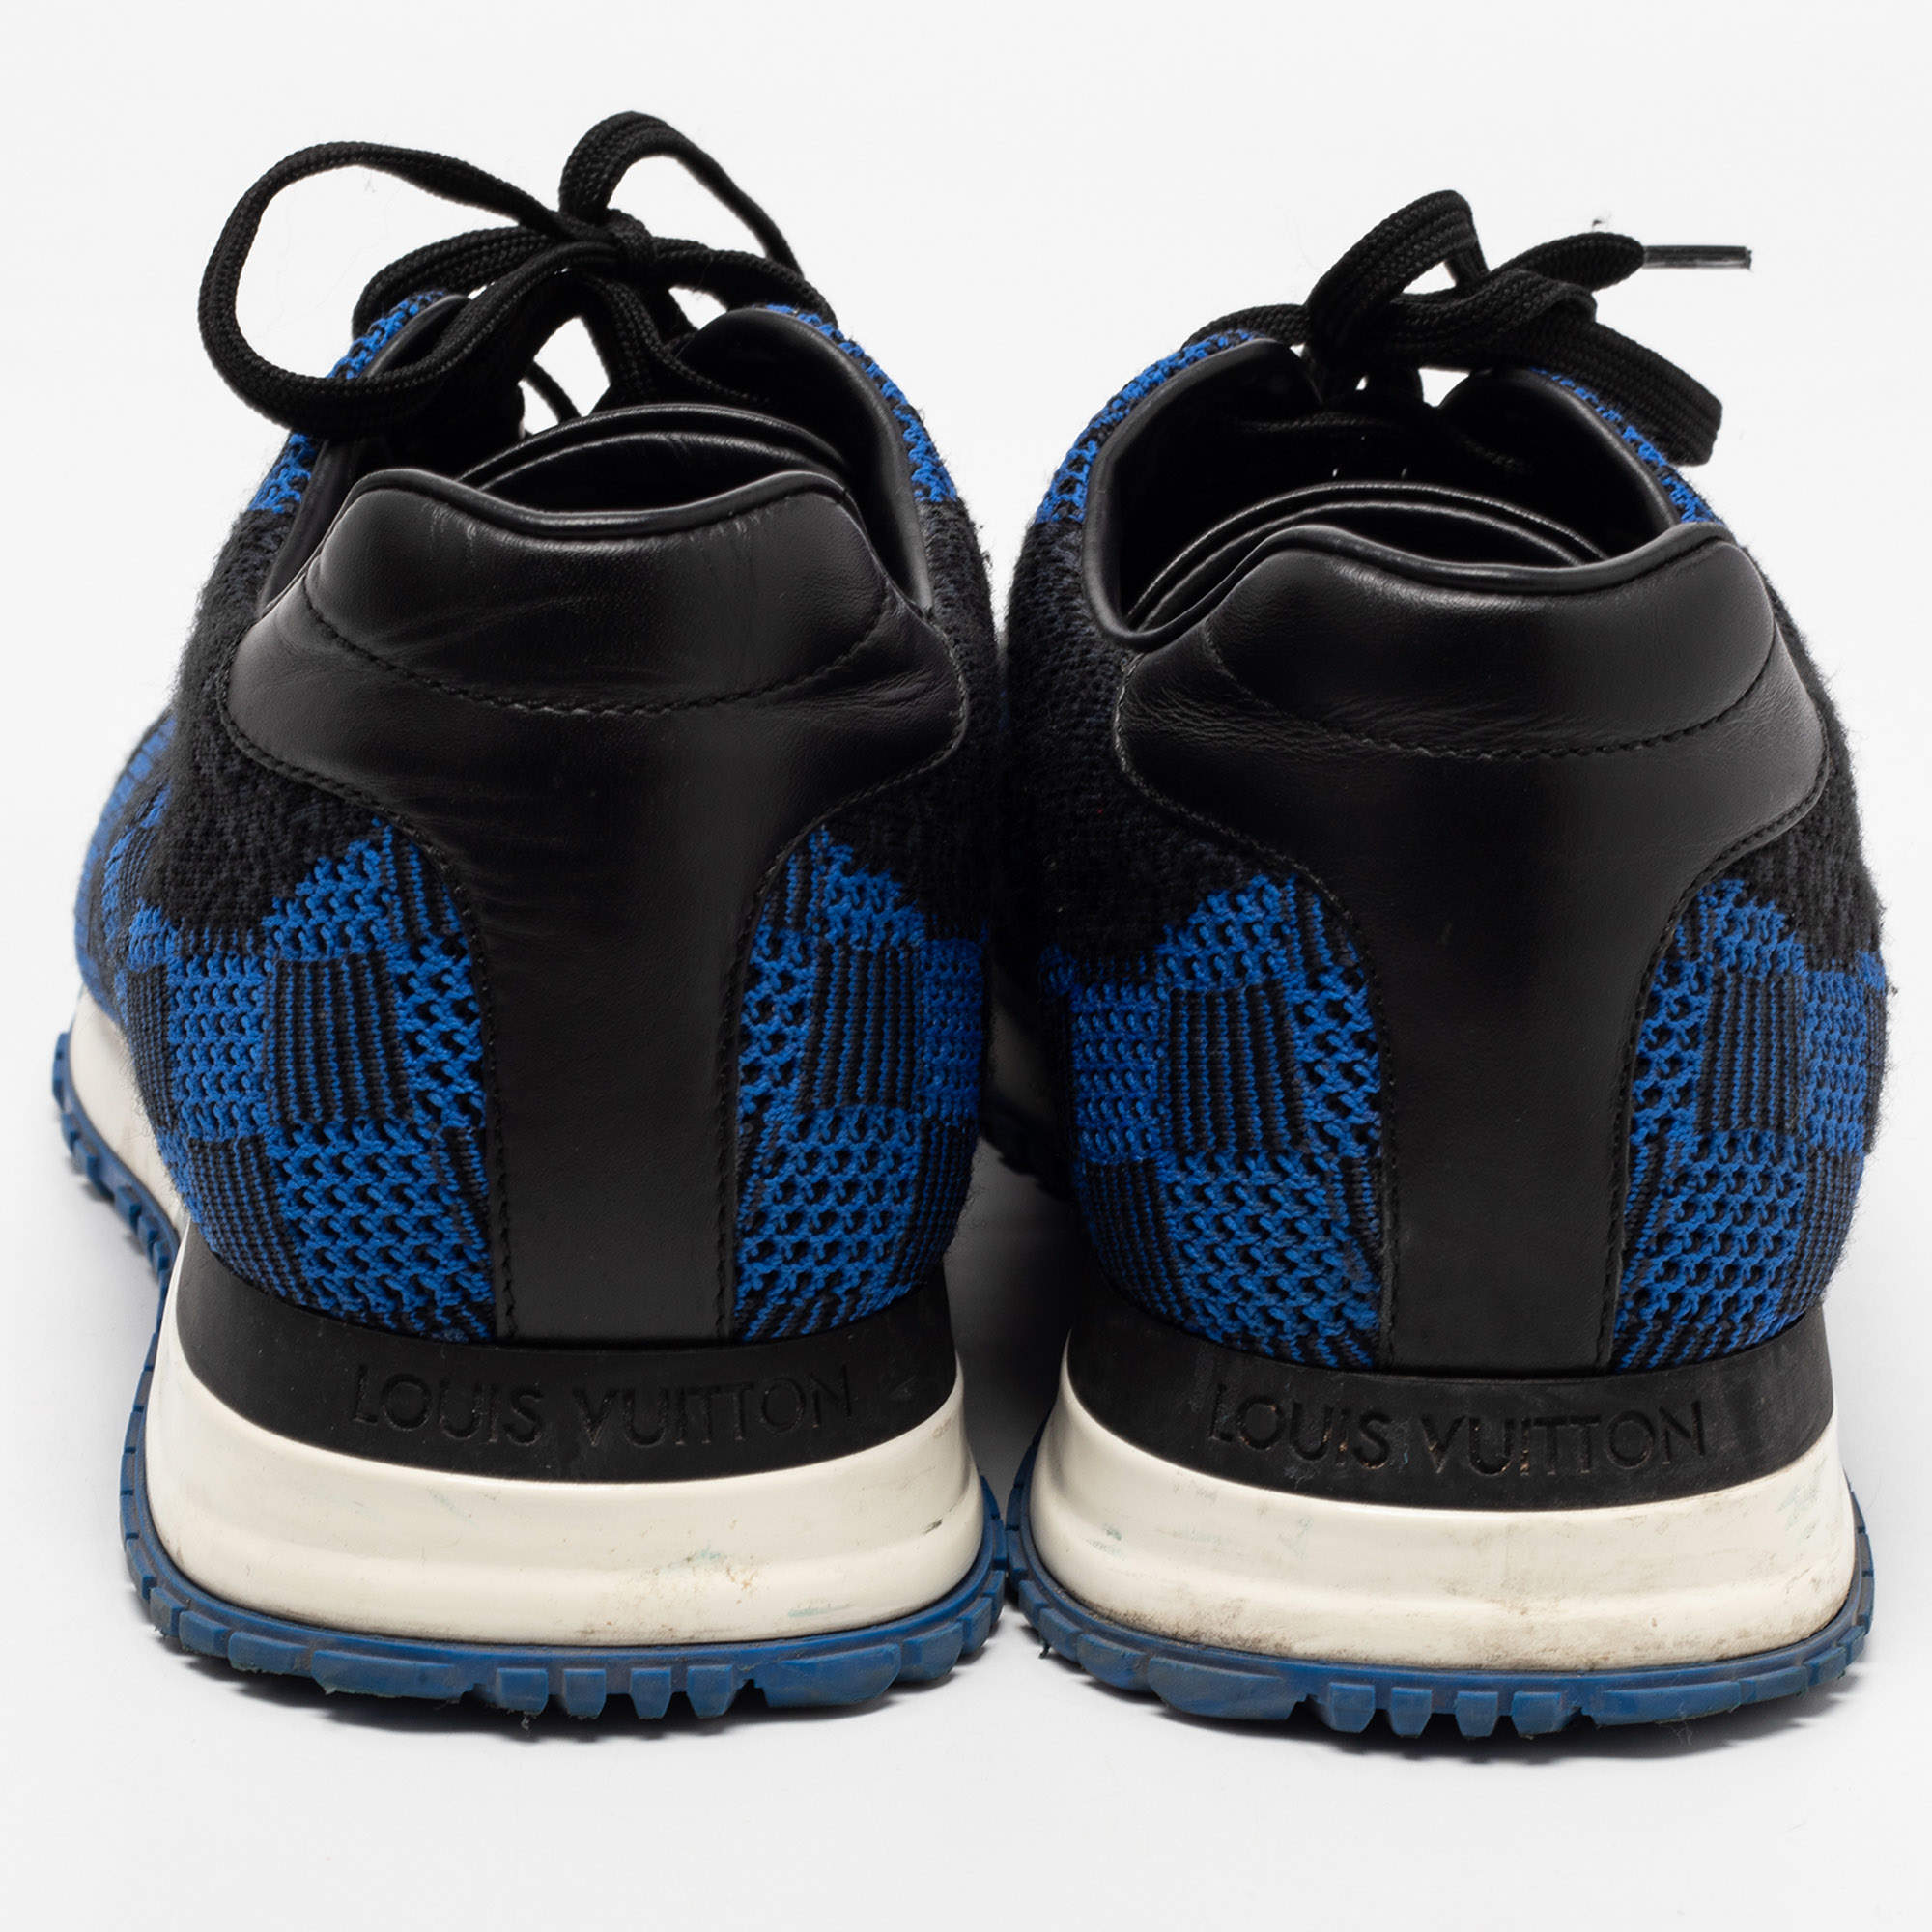 Louis Vuitton Blue/Black Damier Mesh and Leather Run Away Lace Sneakers  Size 40.5 Louis Vuitton | The Luxury Closet